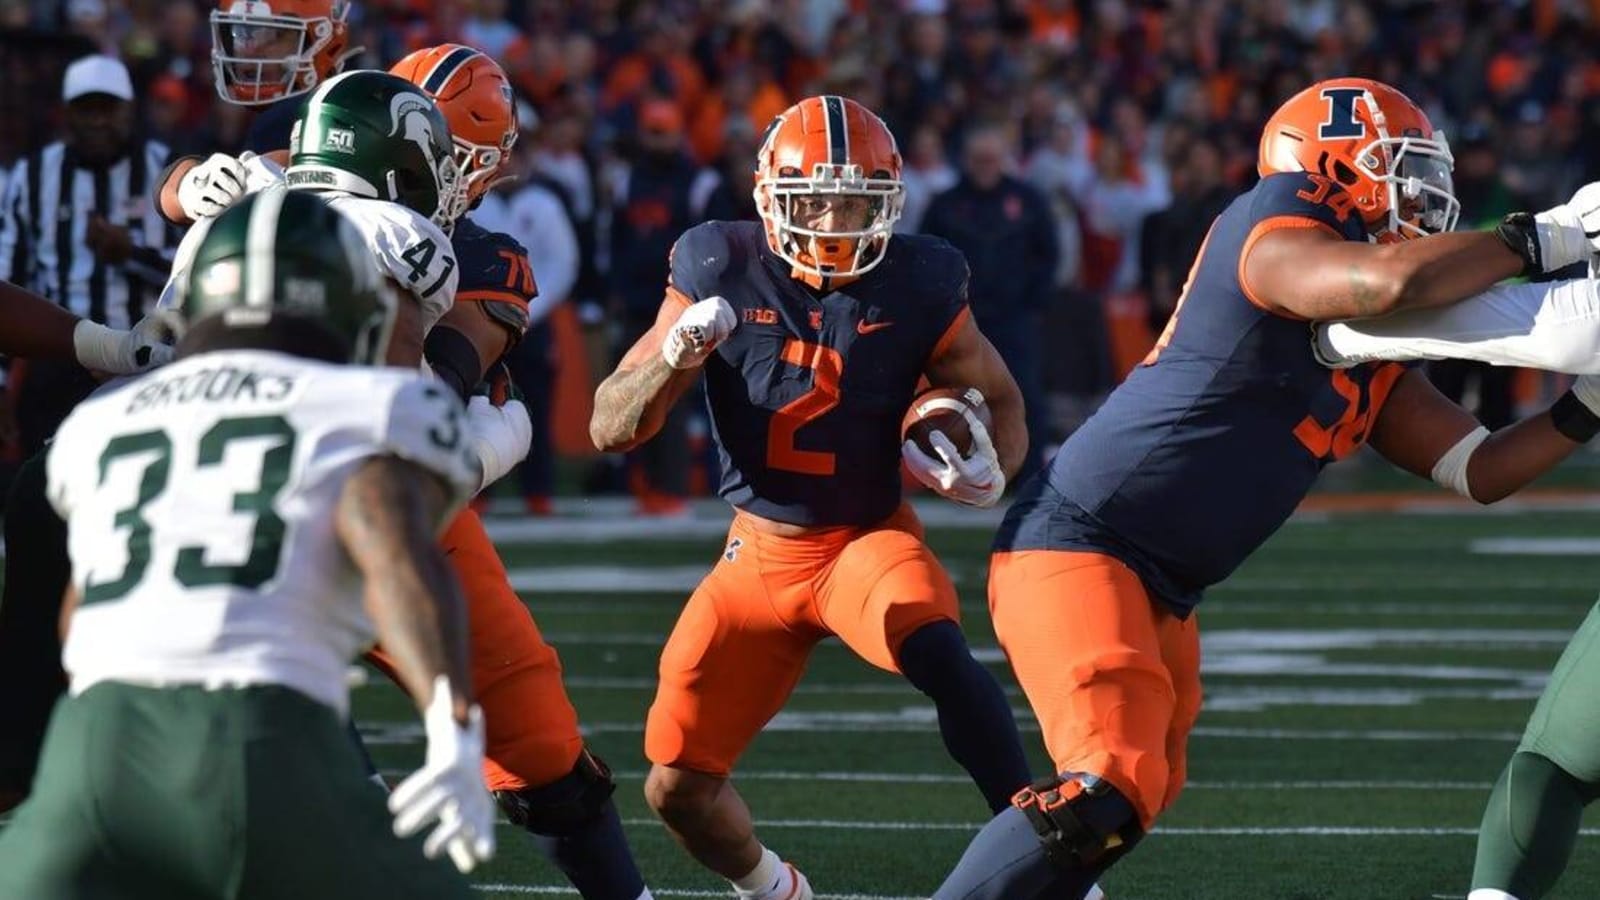 Chase Brown, No. 21 Illinois look to run over Purdue